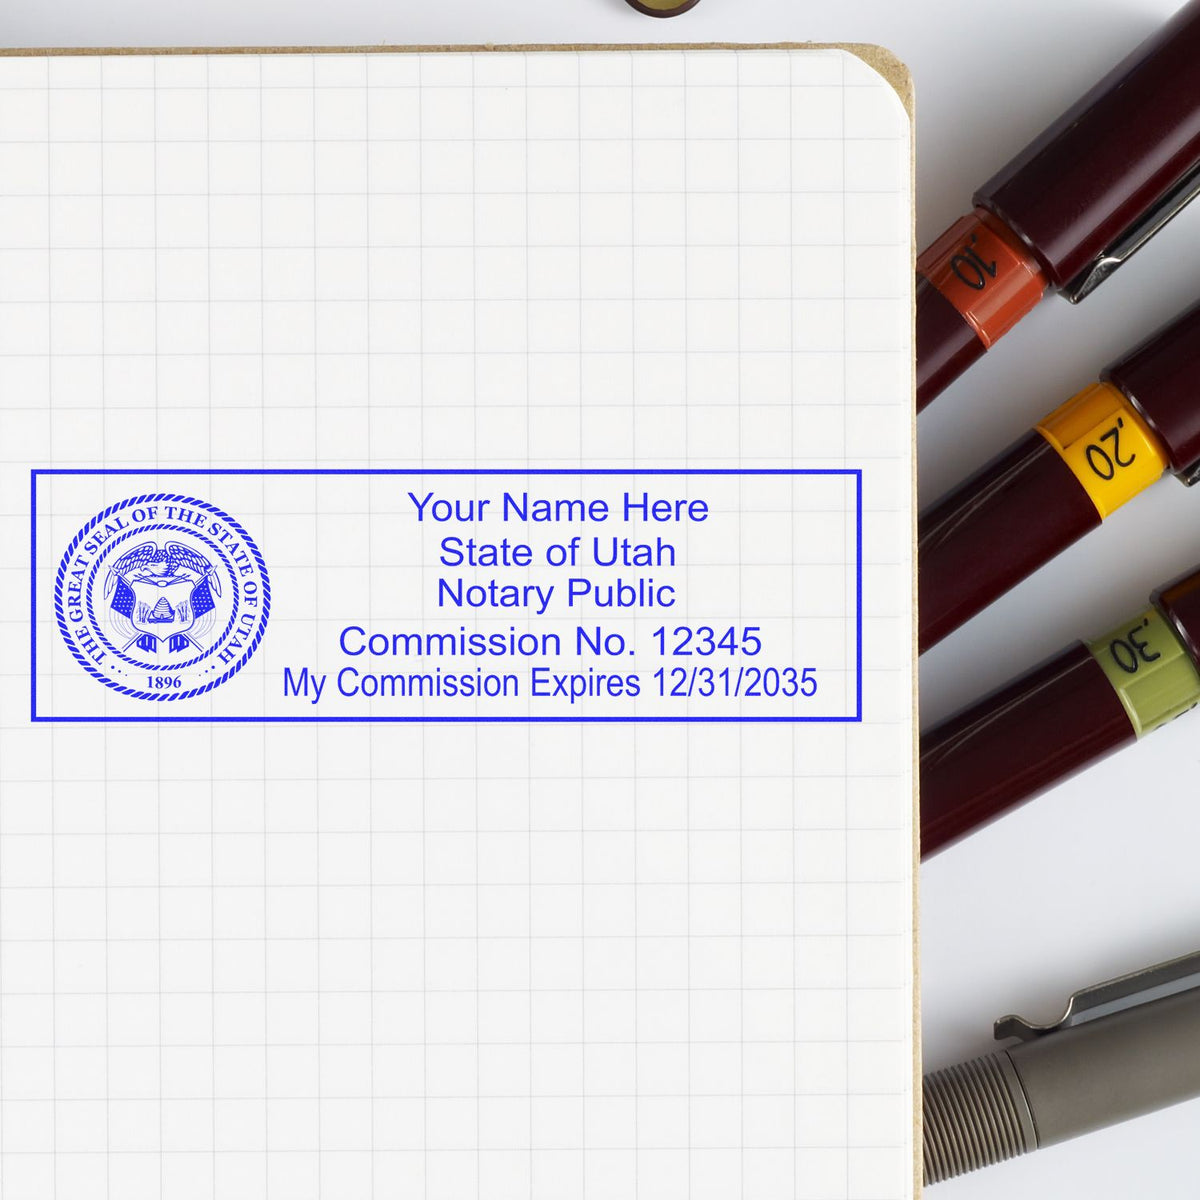 A stamped impression of the Super Slim Utah Notary Public Stamp in this stylish lifestyle photo, setting the tone for a unique and personalized product.